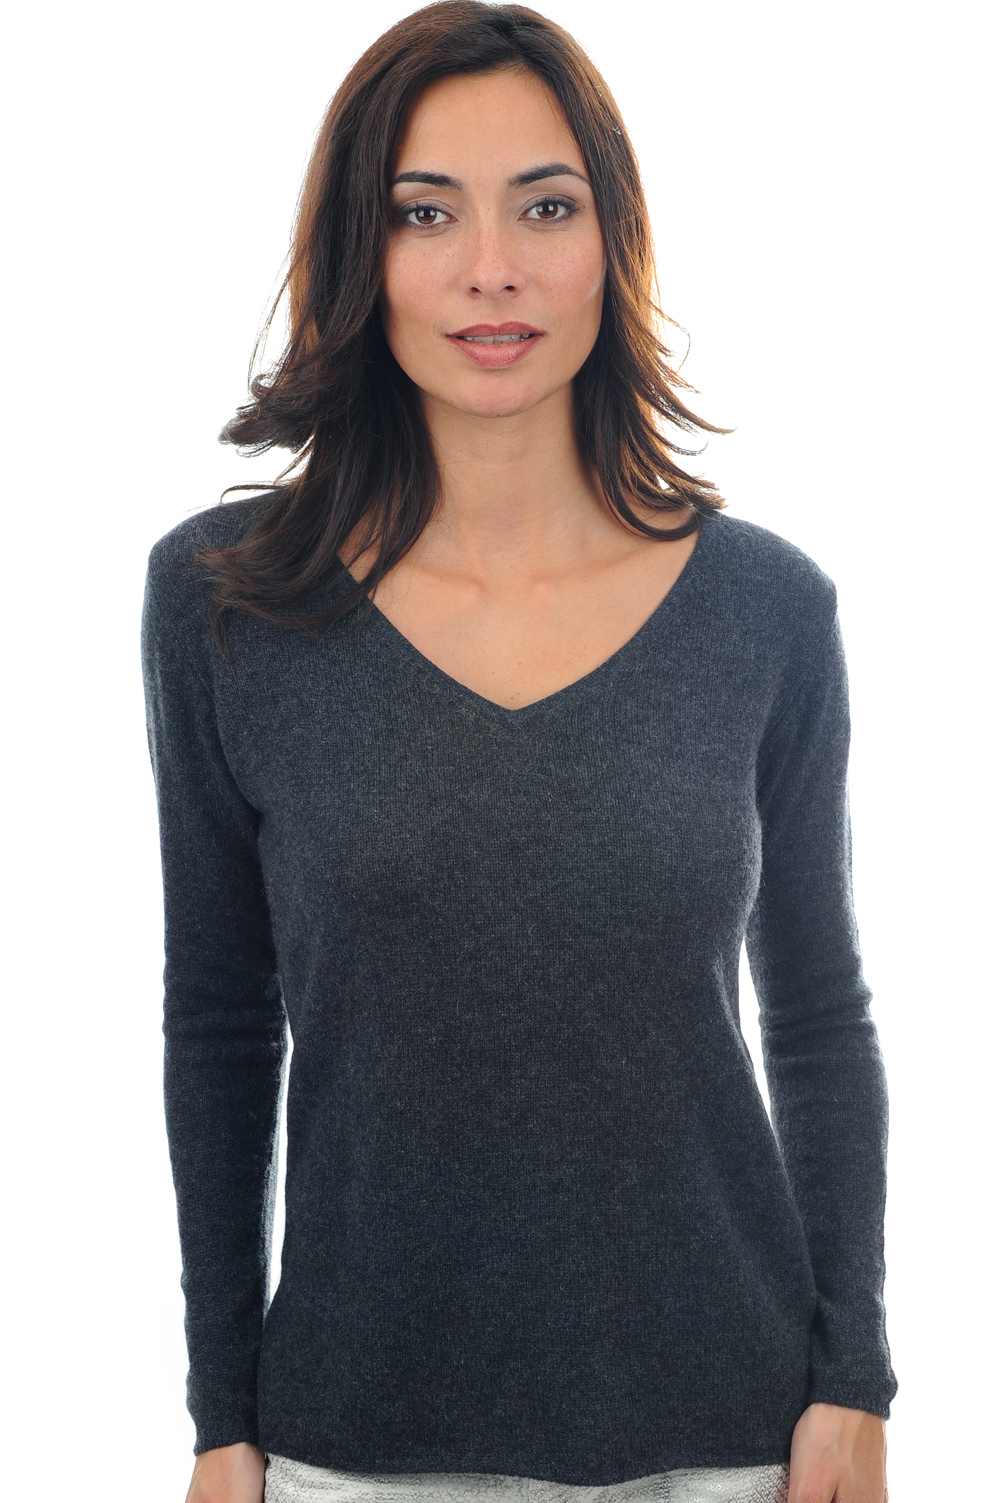 Cashmere ladies basic sweaters at low prices flavie charcoal marl 4xl